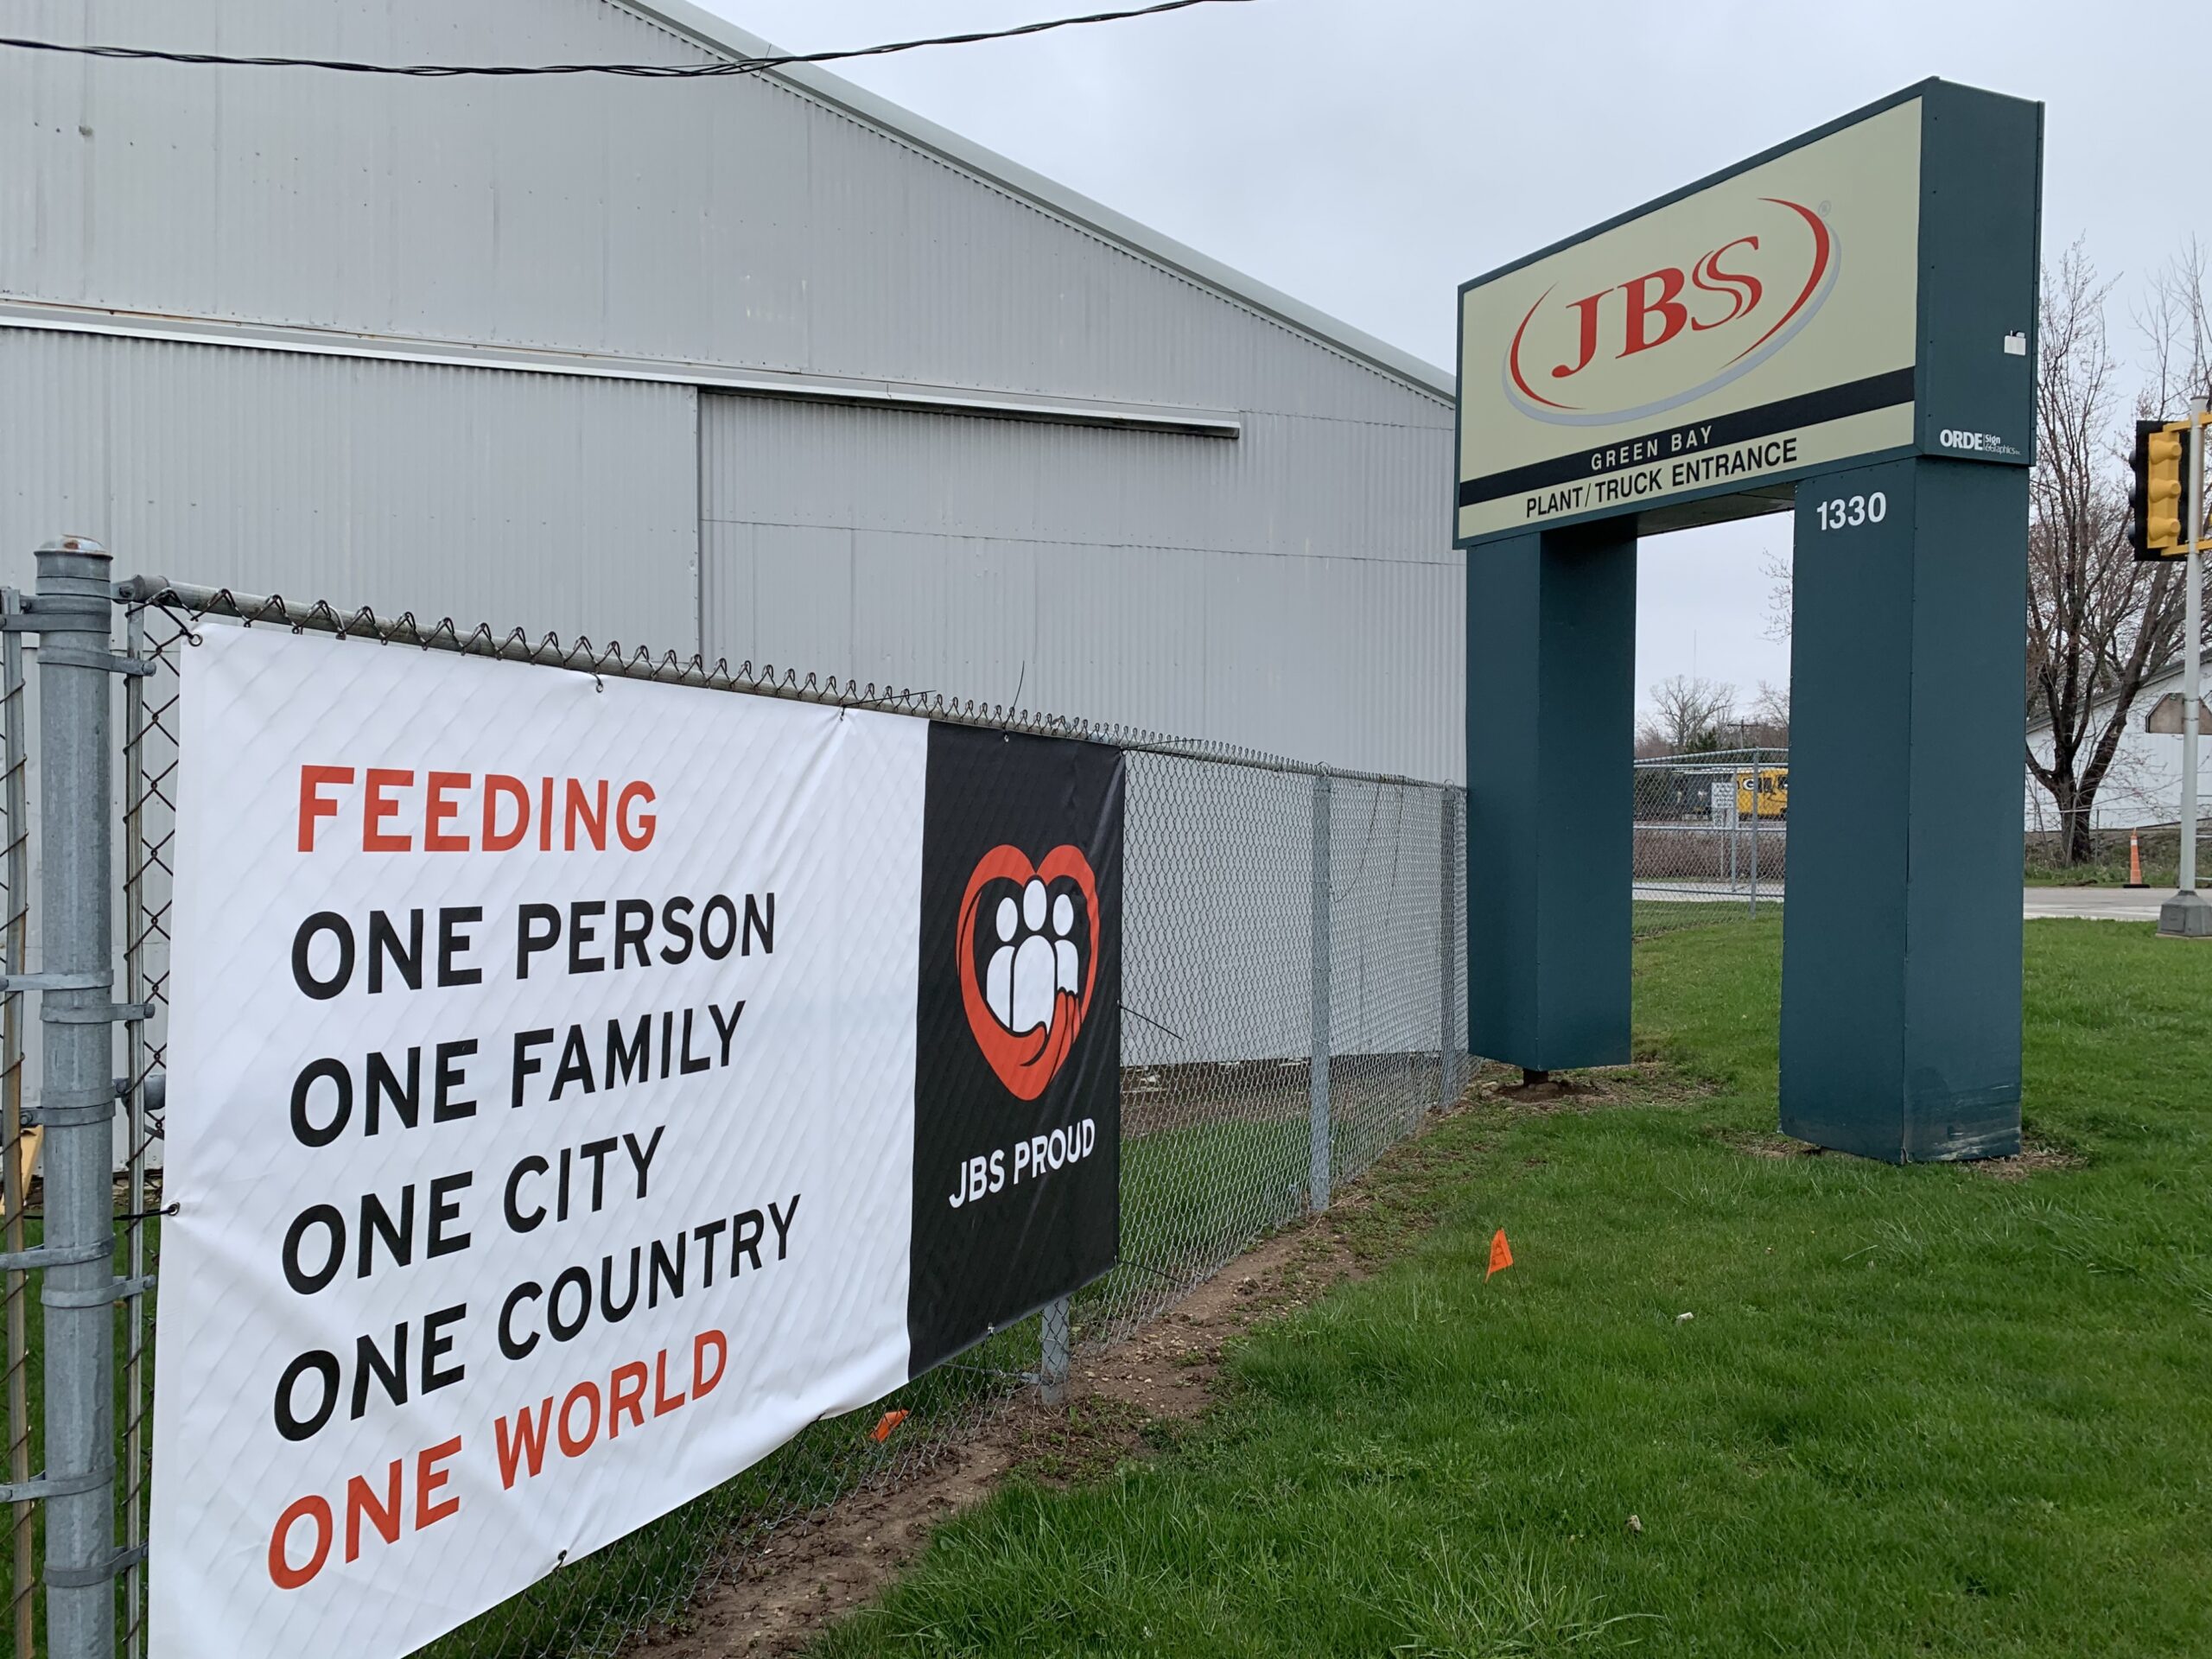 Green Bay meatpacker will pay $15K penalty in settlement over unsafe COVID-19 practices